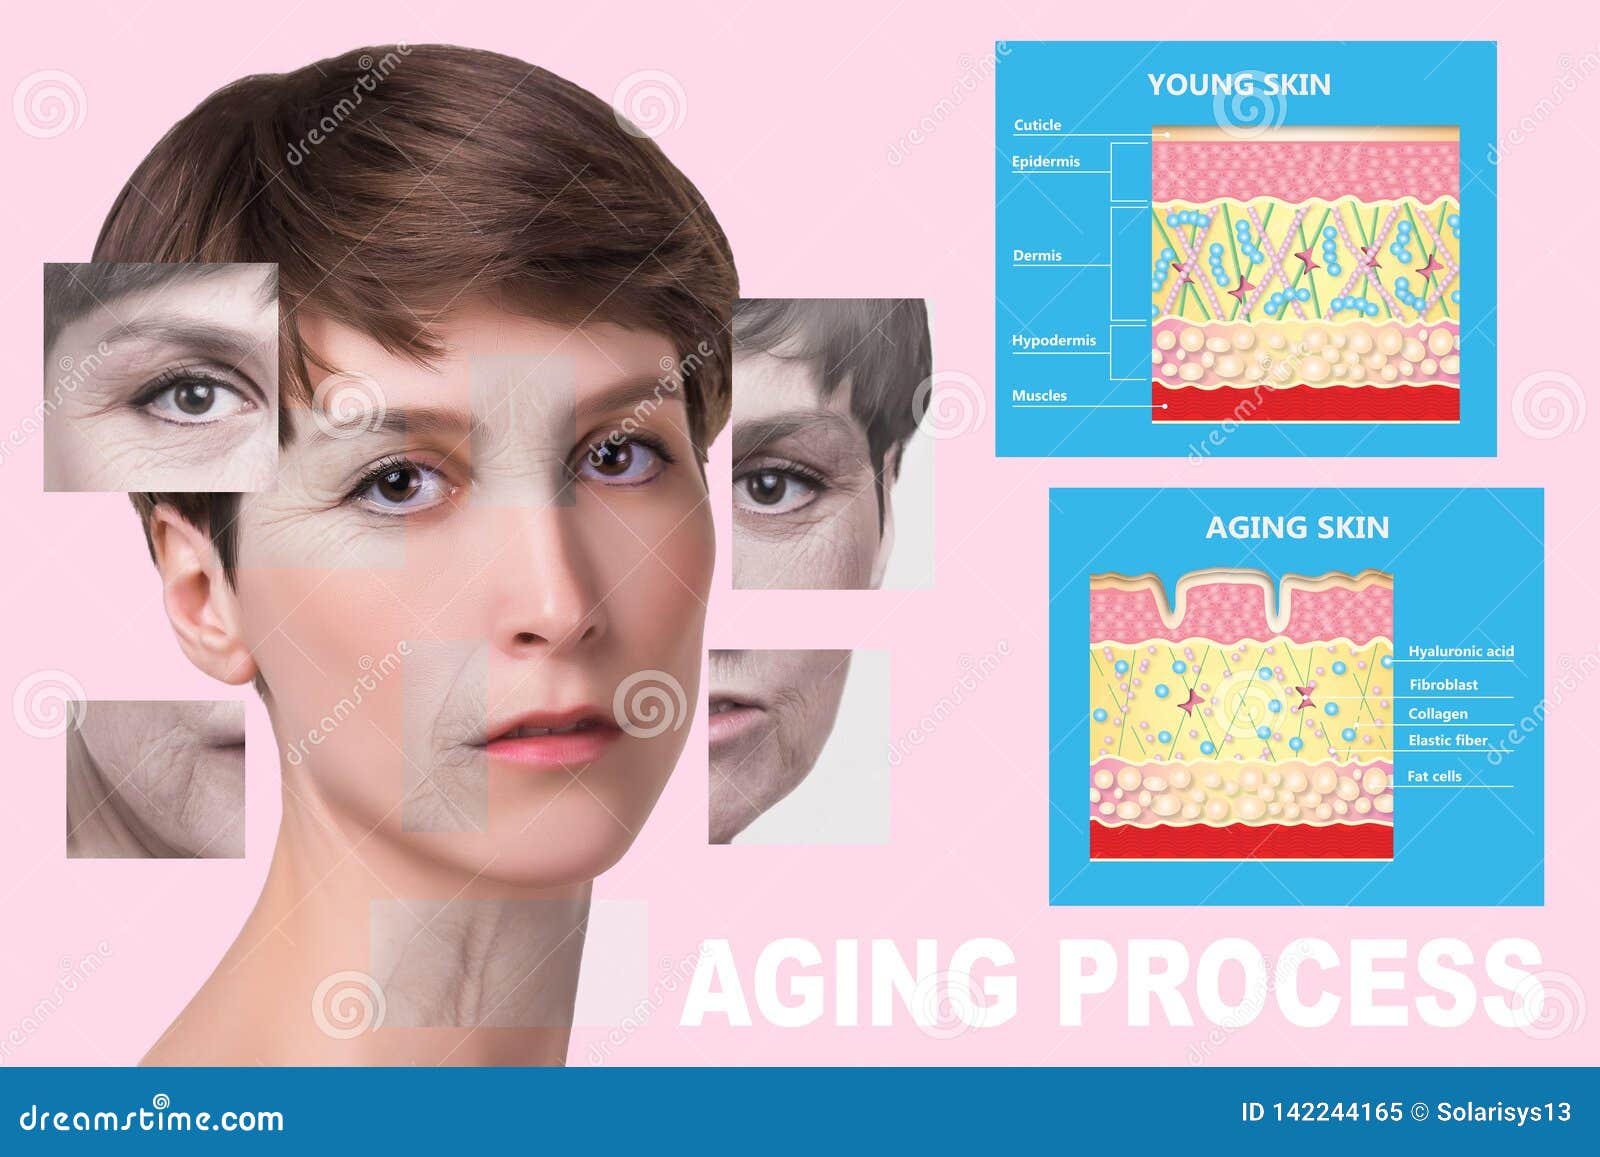 younger skin and aging skin. elastin and collagen.